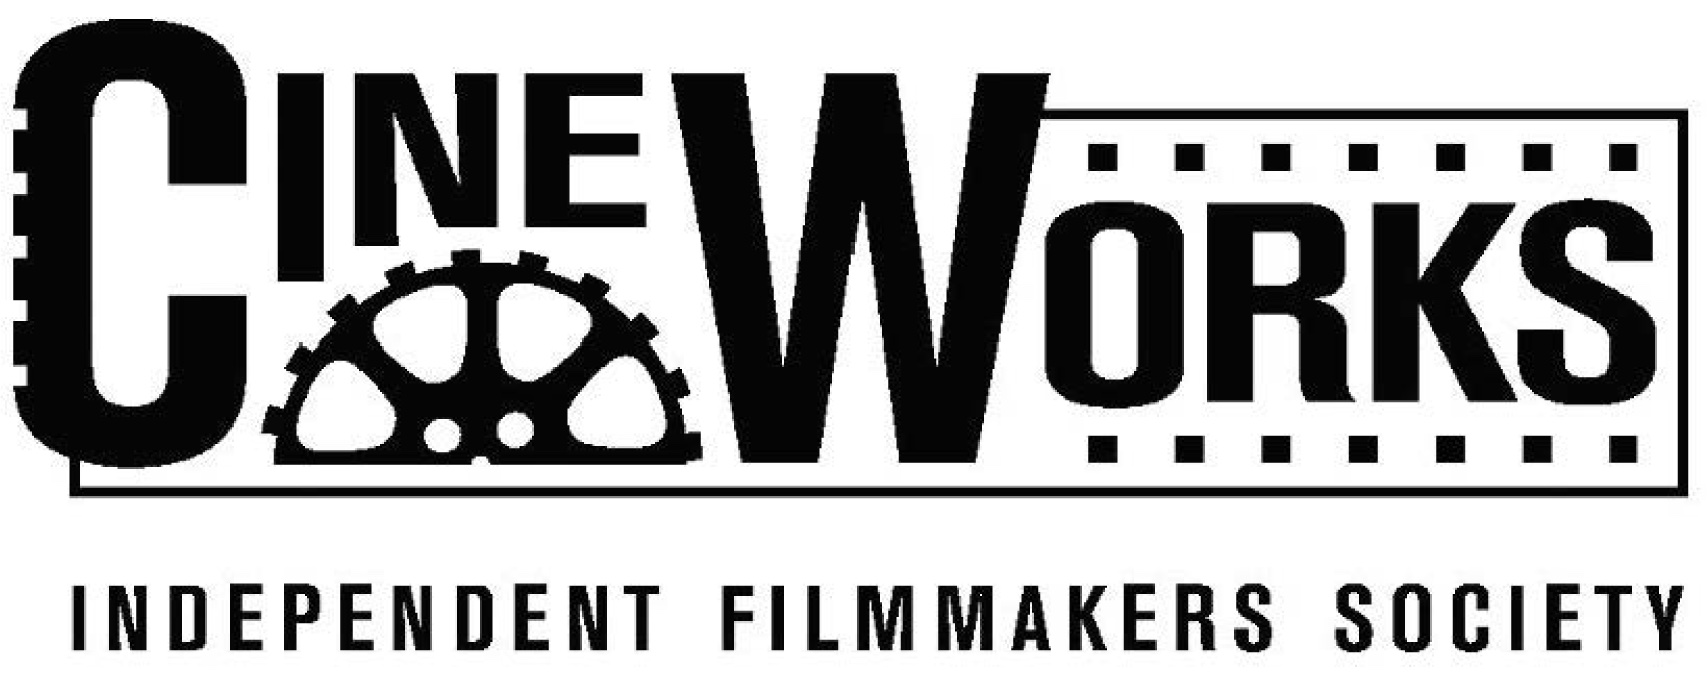 Cineworks Independent Filmmakers Society is an Artist-Run Centre based in Vancouver, BC. Through equ